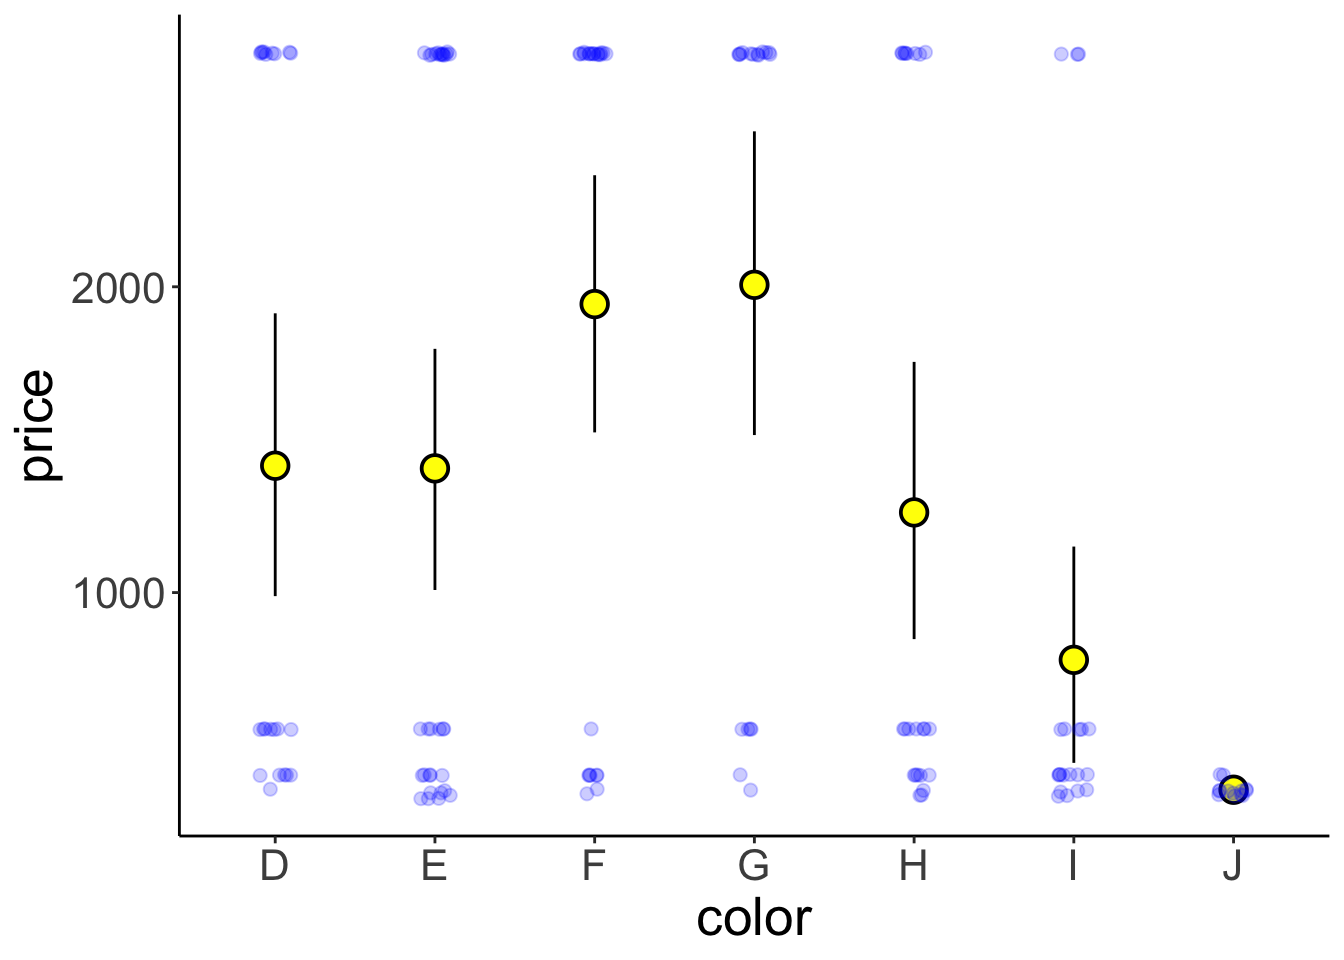 Price of differently colored diamonds. Large yellow circles are means, small black circles are individual data poins, and the error bars are 95% bootstrapped confidence intervals.